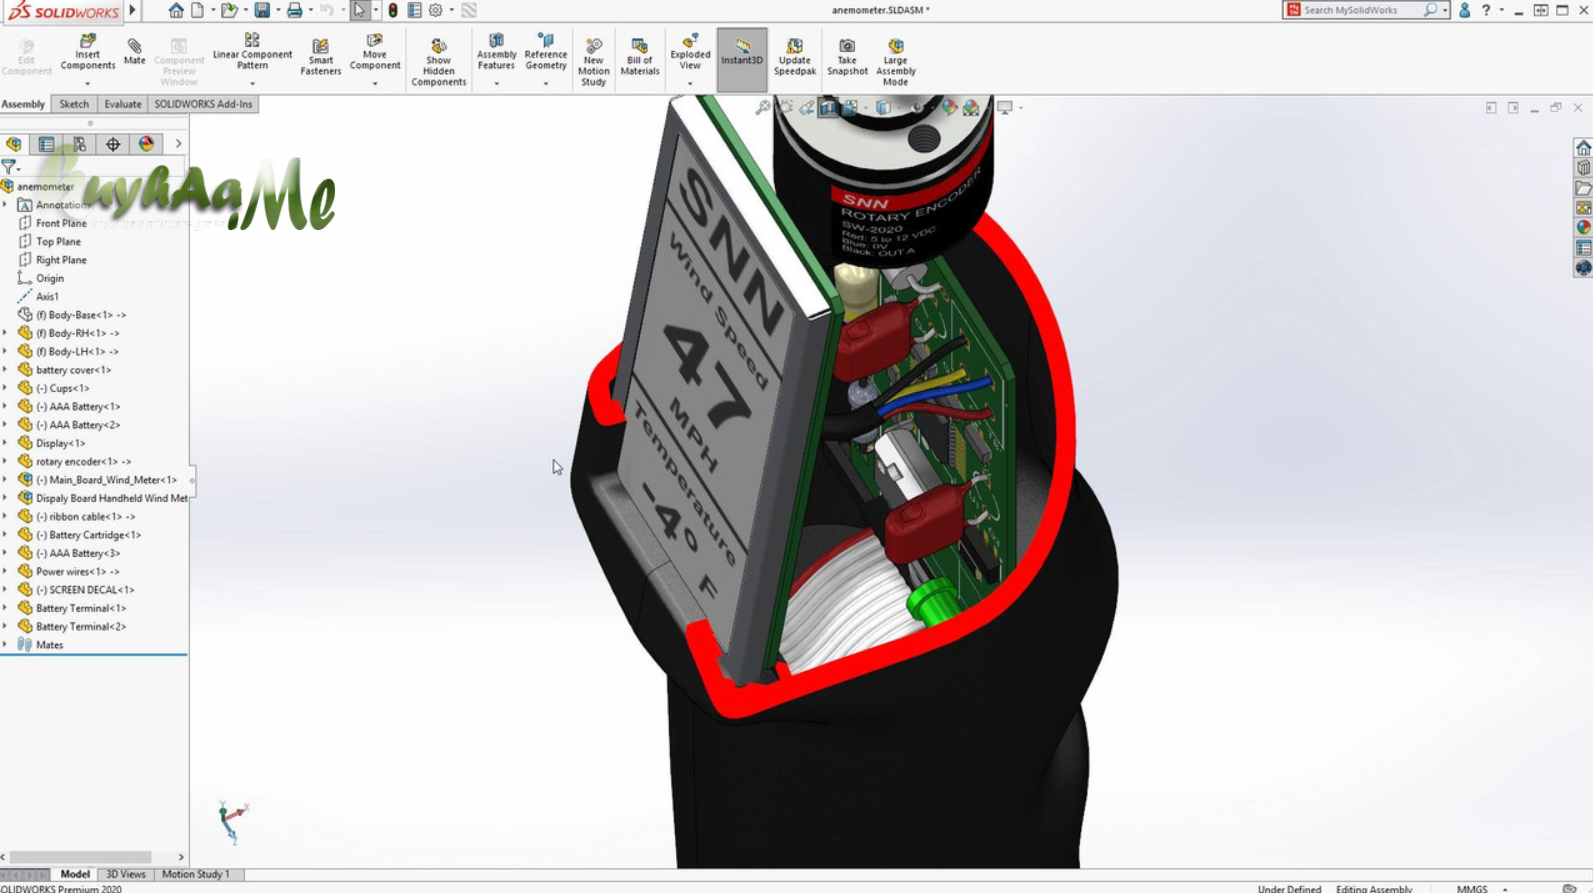 solidworks1-6256784